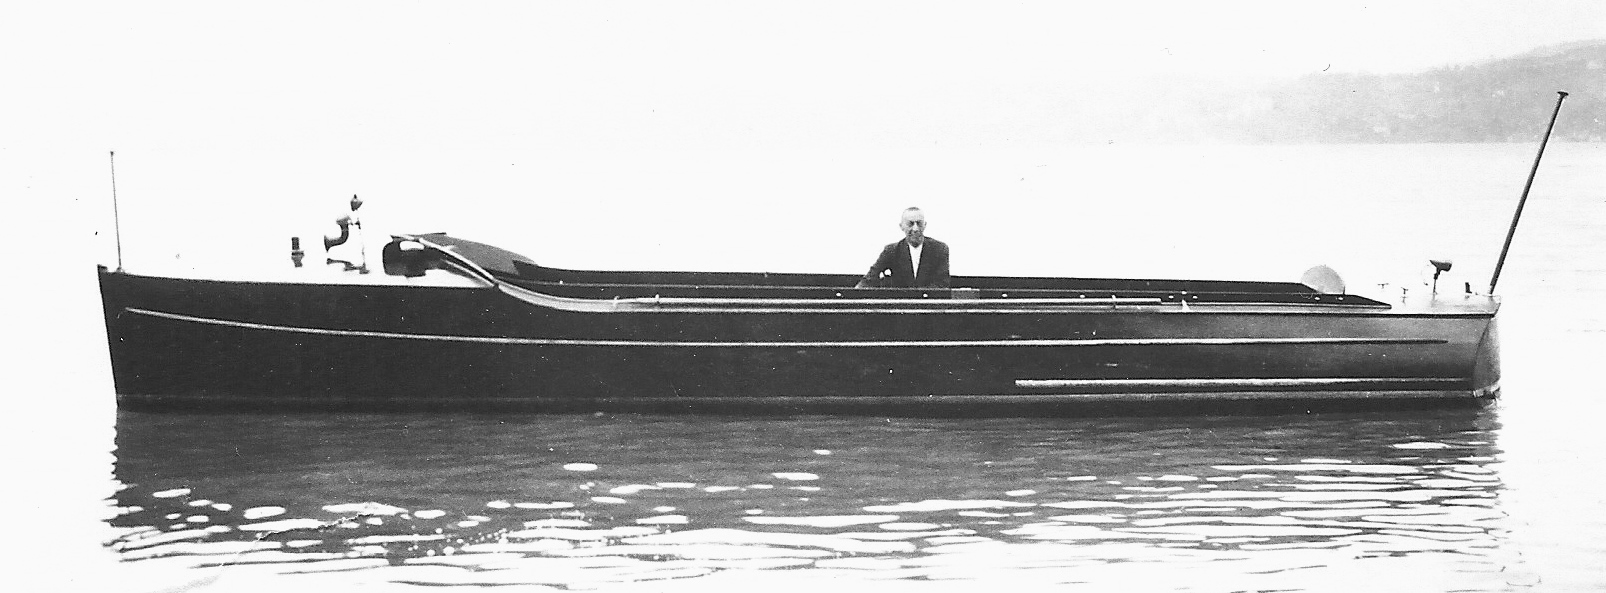 Sergei Rachmaninoff in his boat lake lucerne